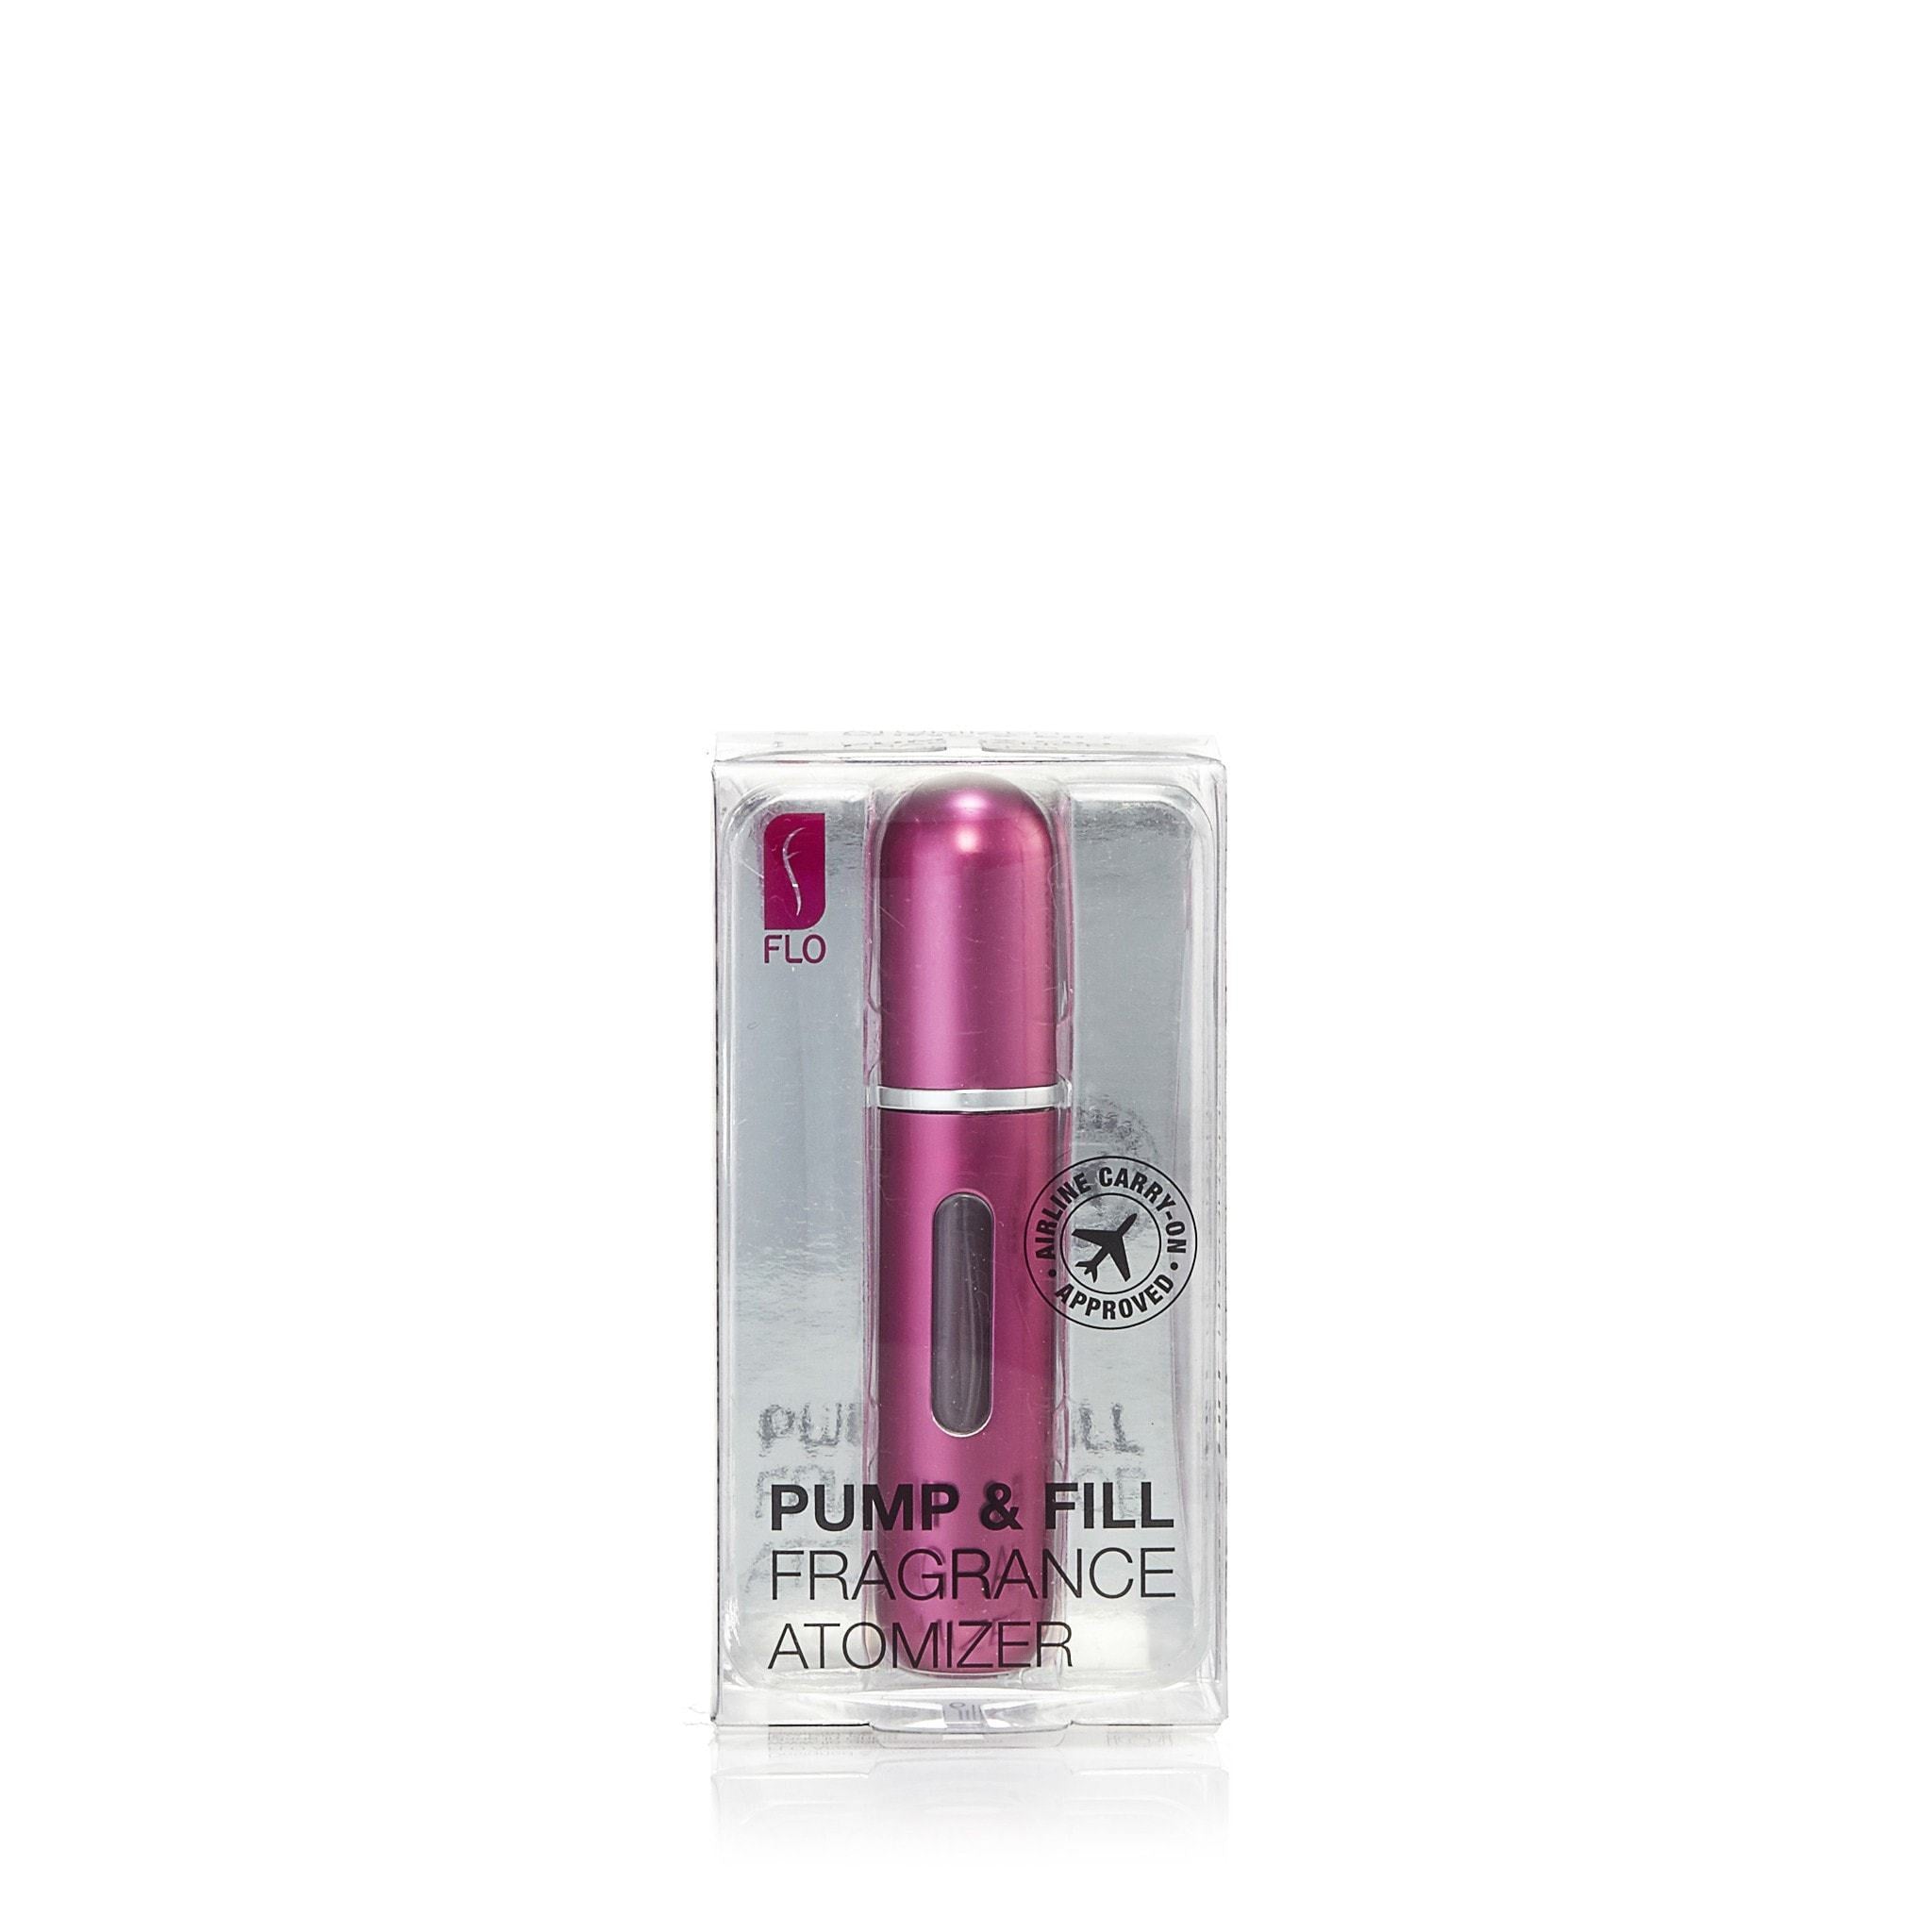 Fragrance Flo and Pump Fill by Atomizer – Perfumania